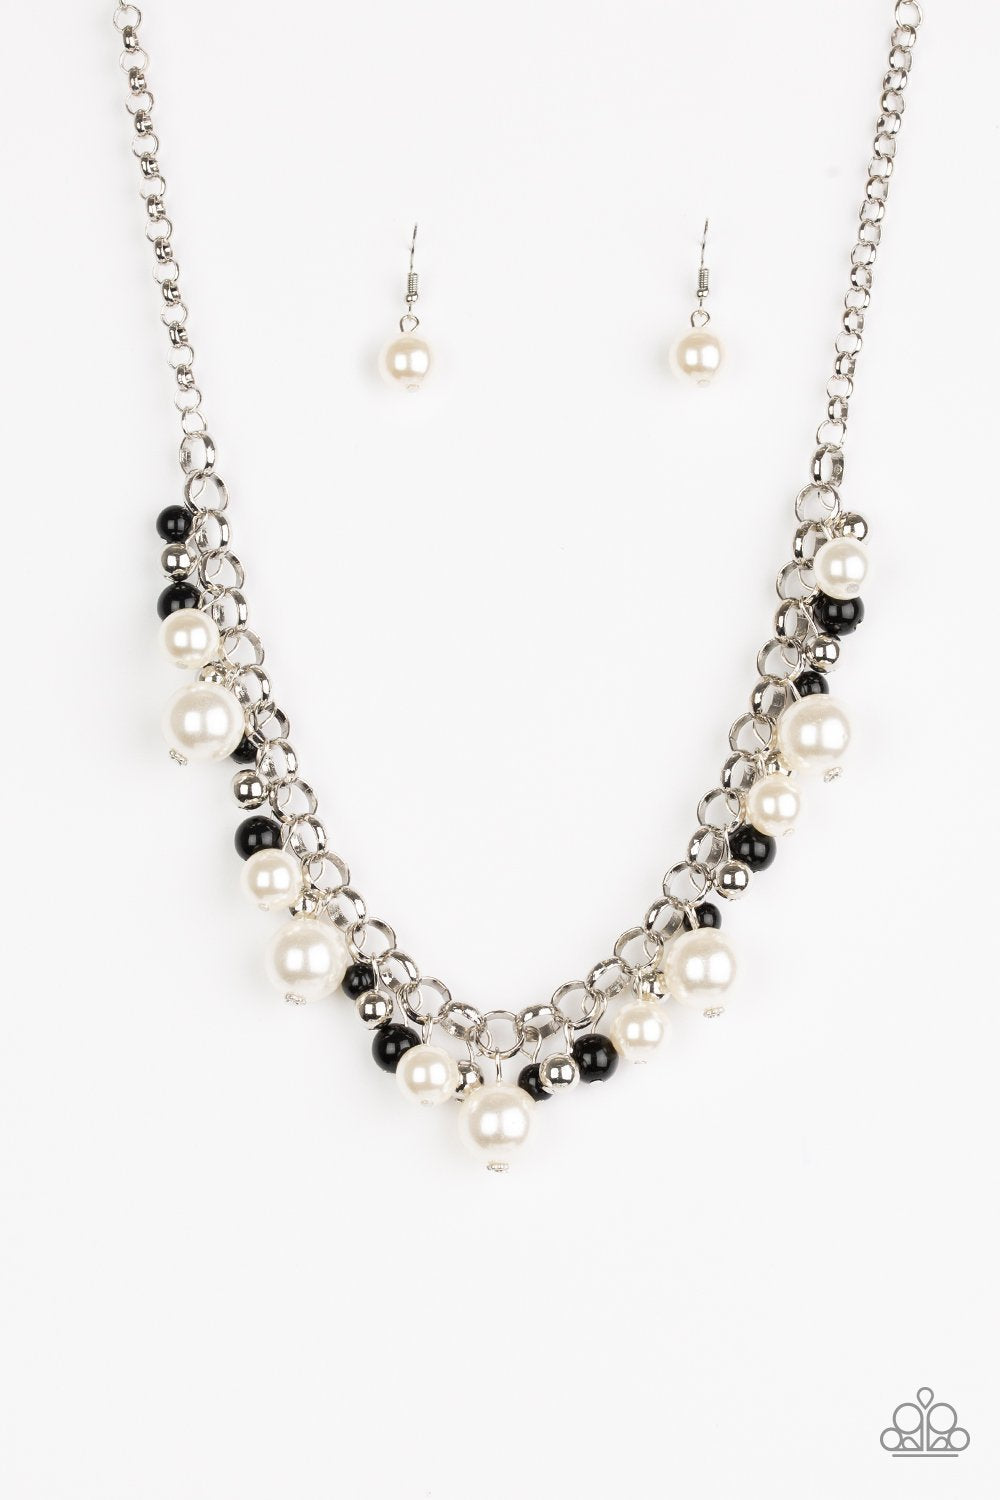 The Upstater Black Necklace